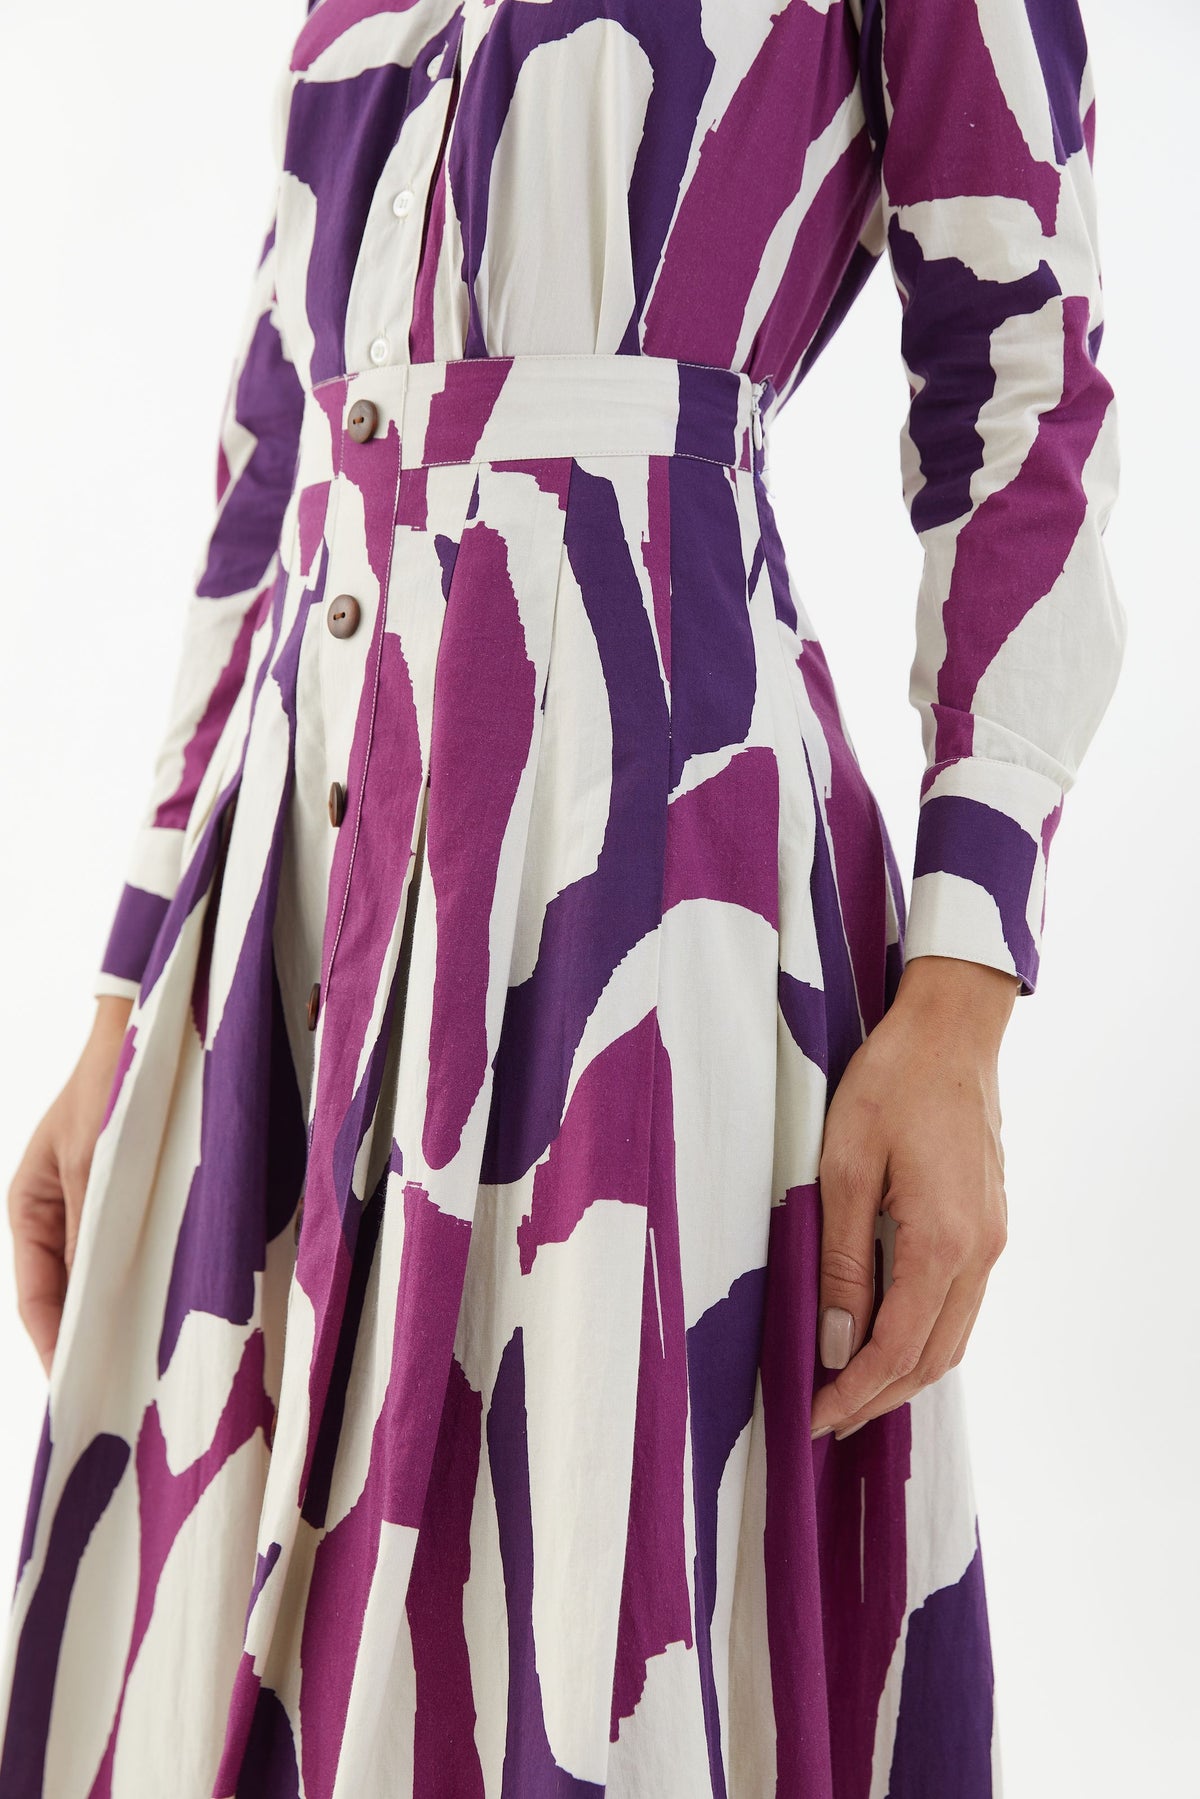 PURPLE, PINK AND WHITE ABSTRACT SKIRT